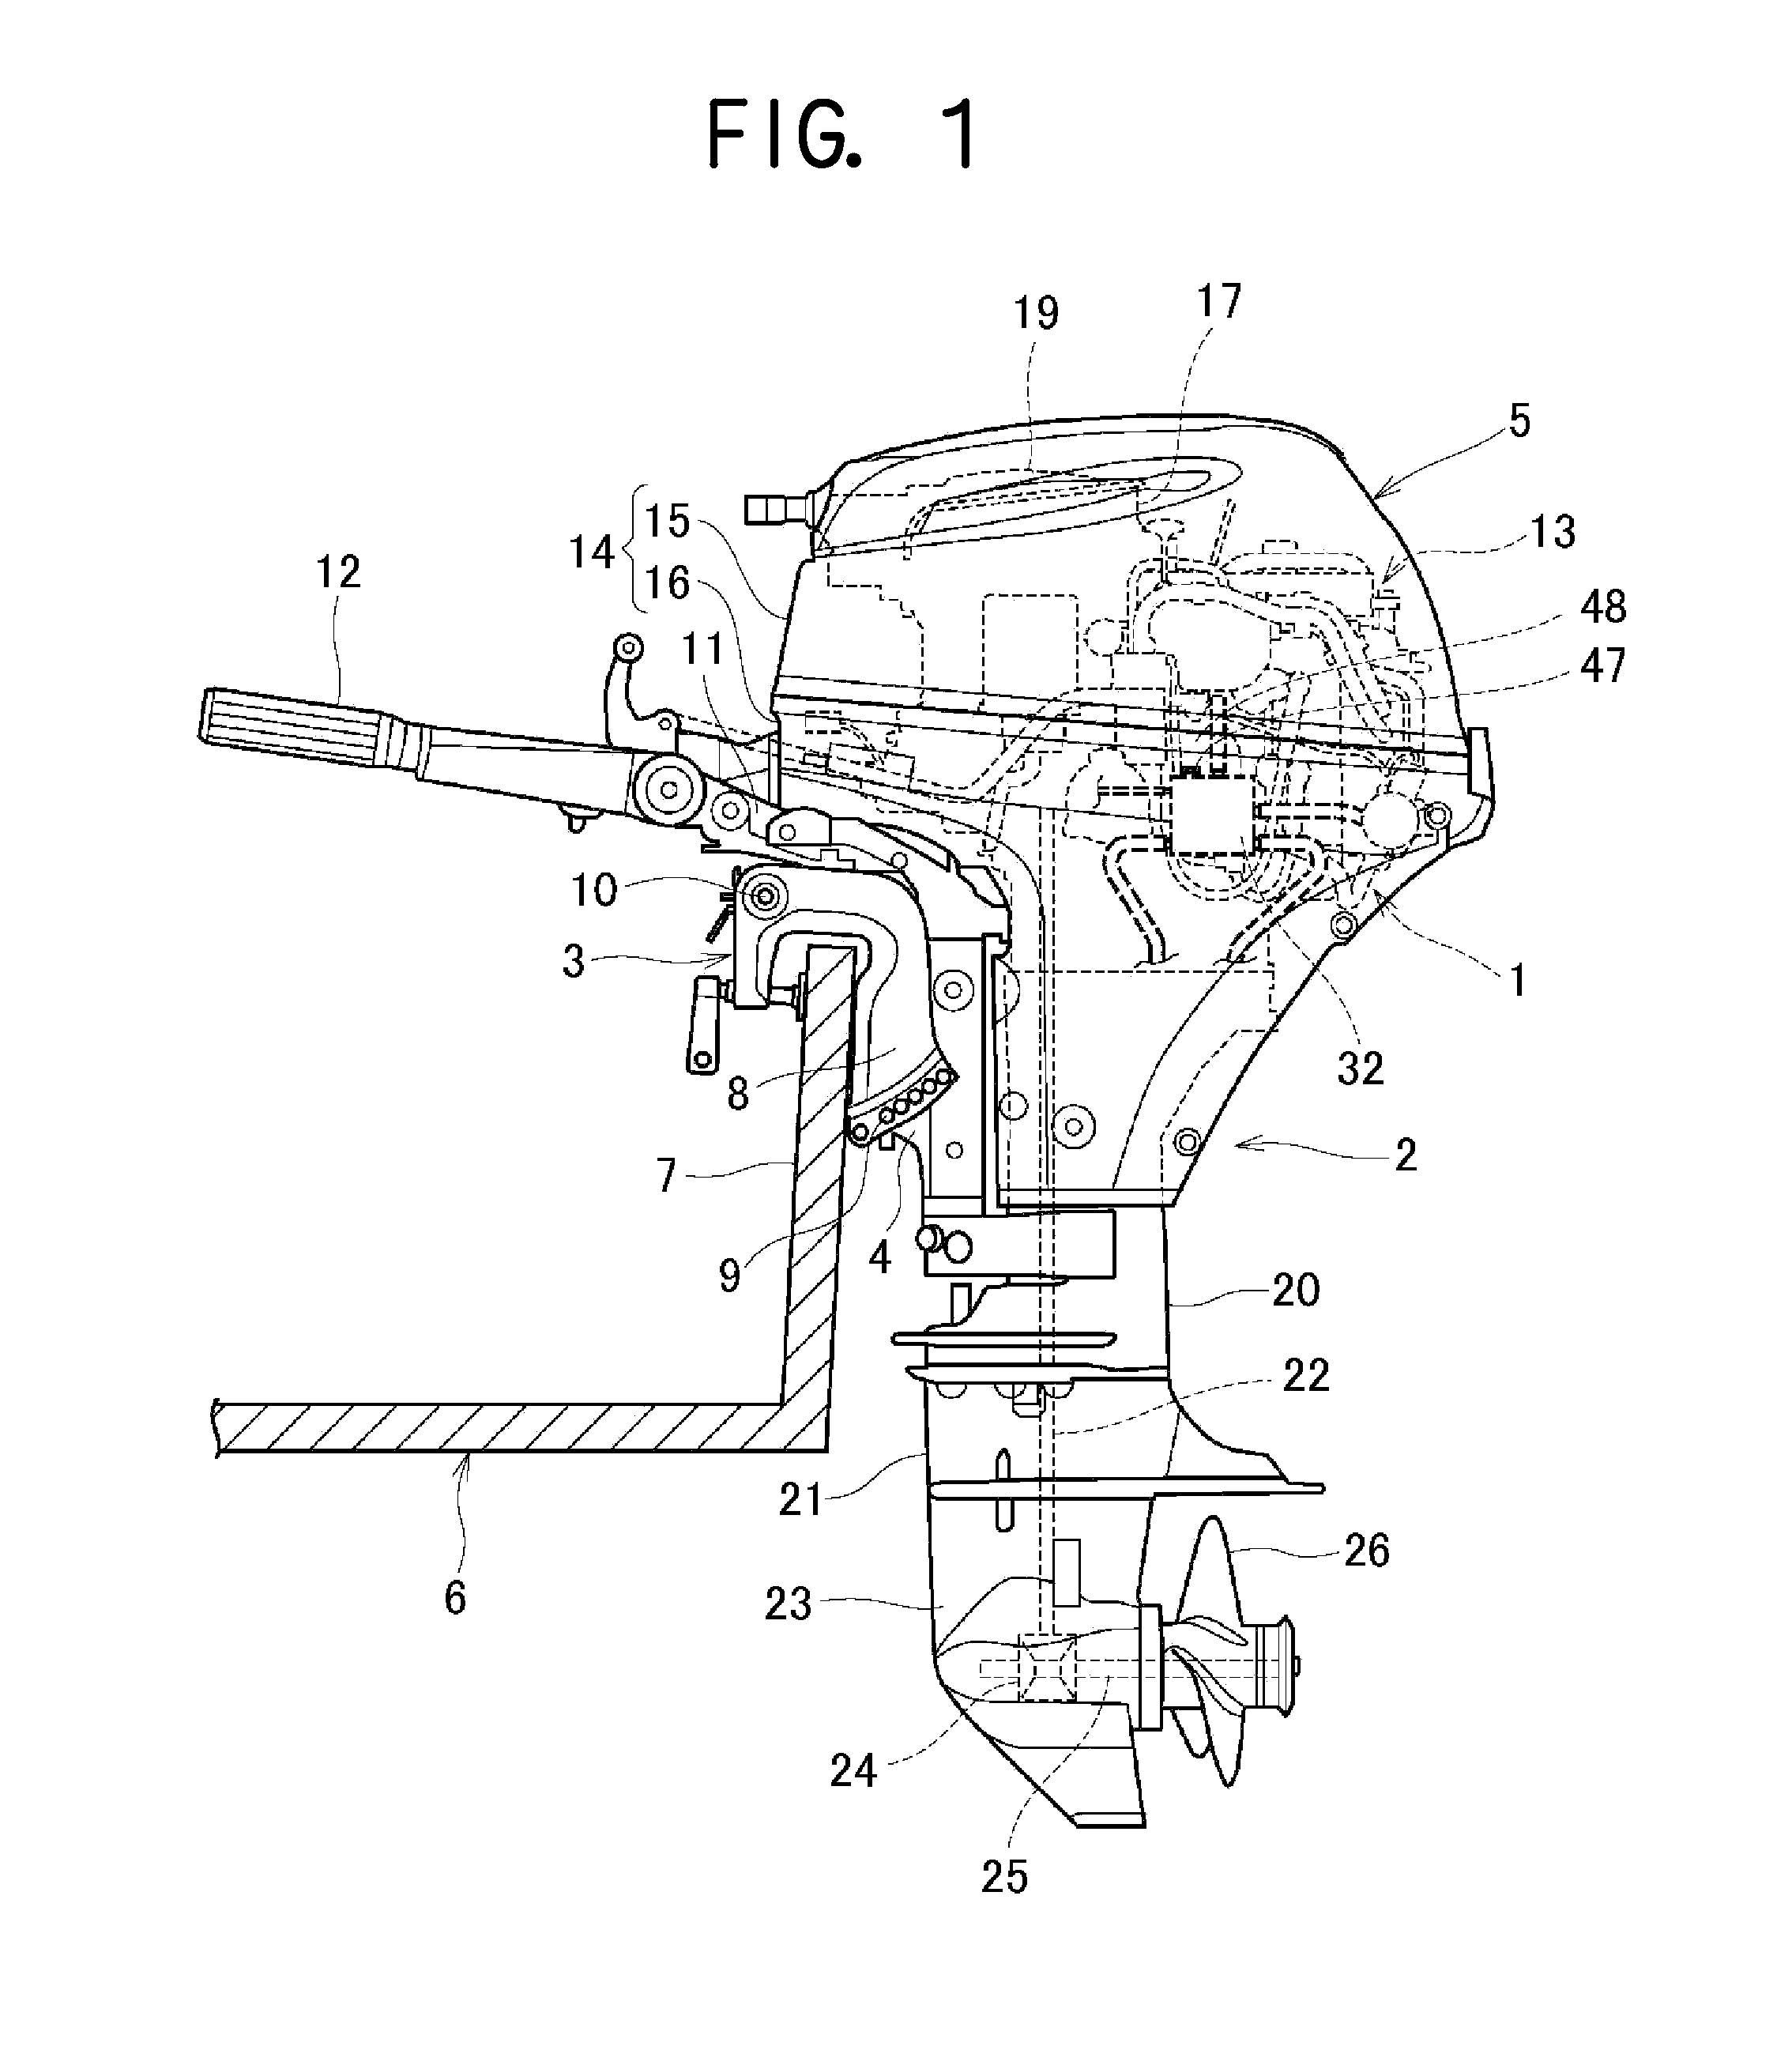 Fuel supply system of outboard motor